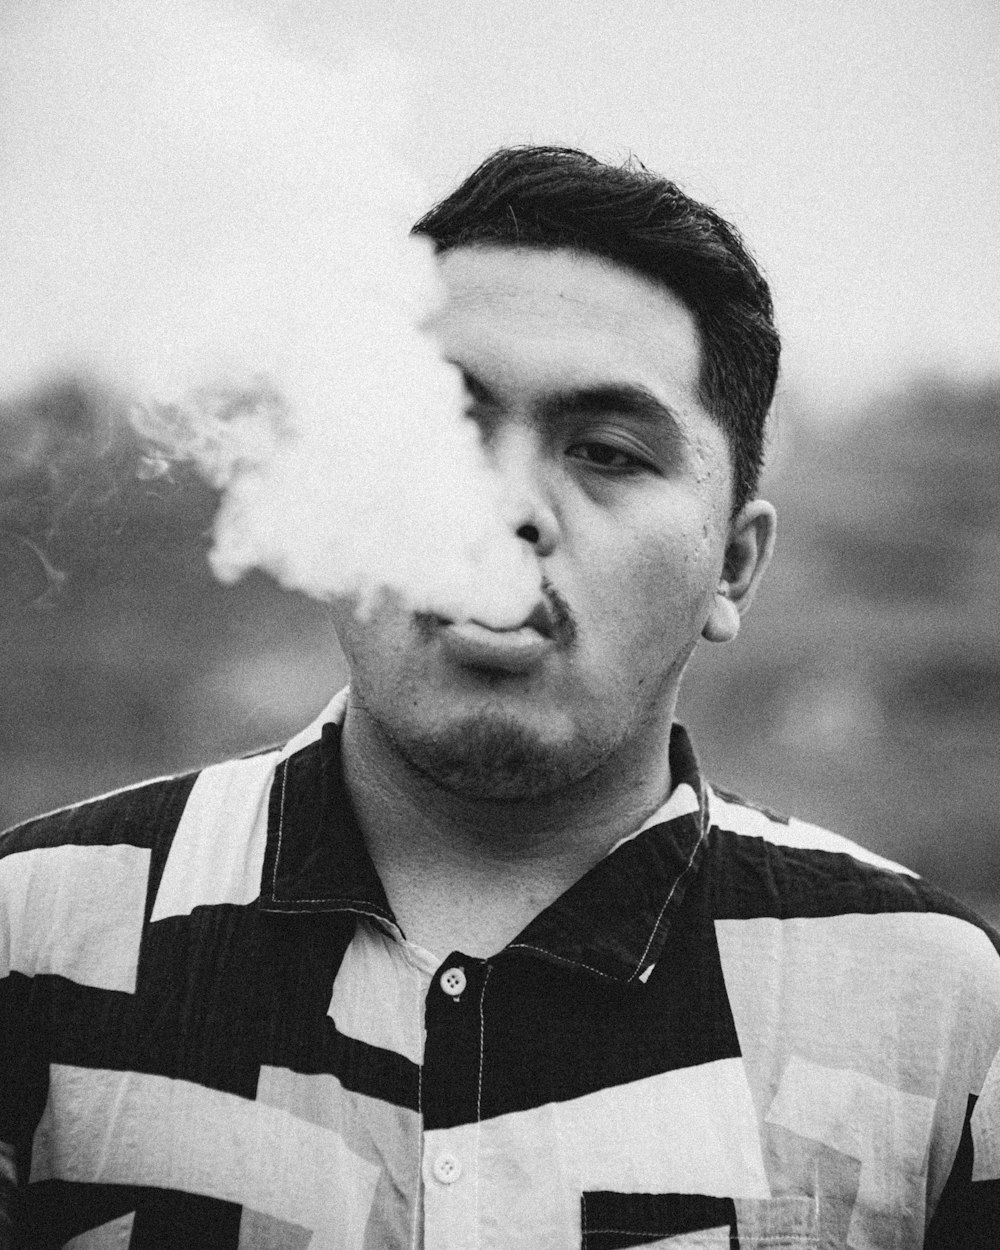 man in black and white striped polo shirt smoking